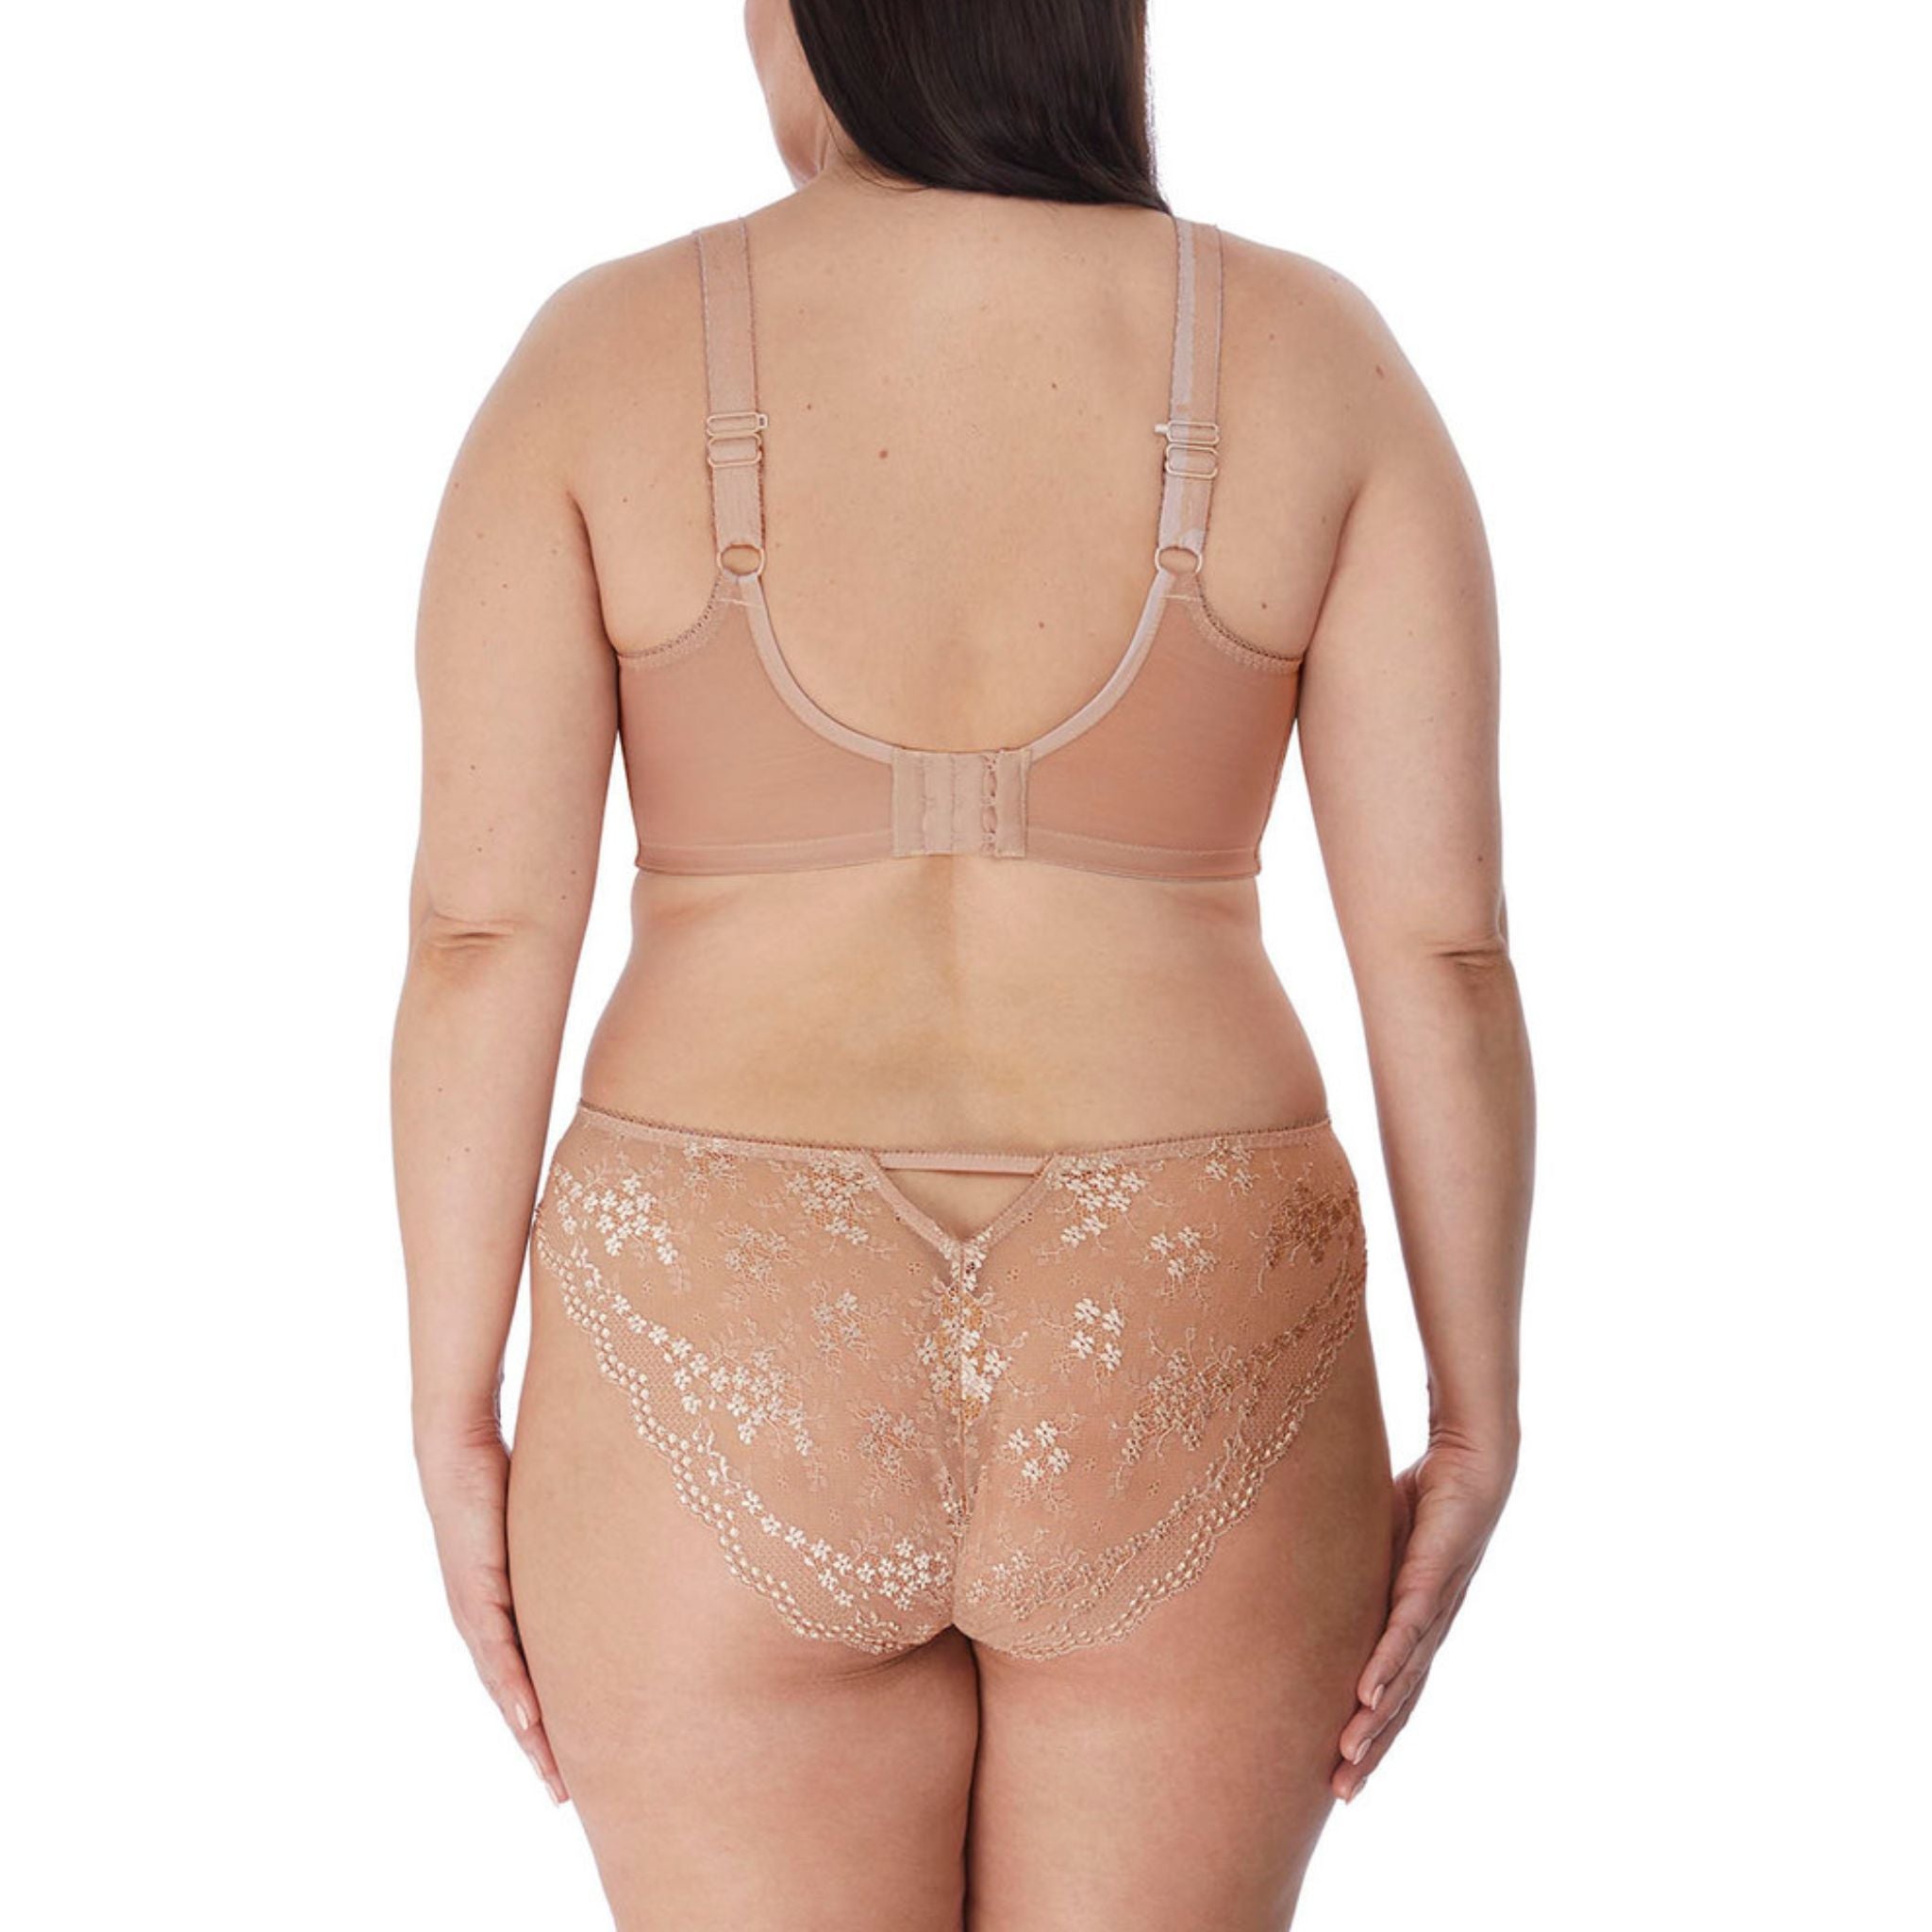 A lingerie drawer essential, discover the Charley Plunge Bra in an everyday Fawn colourway. The three sectioned cups plus side support offers perfect shape and uplift, while a low cut neckline creates plunge without push up. An adjustable J-hook enables the back strap to be converted to a racerback style.